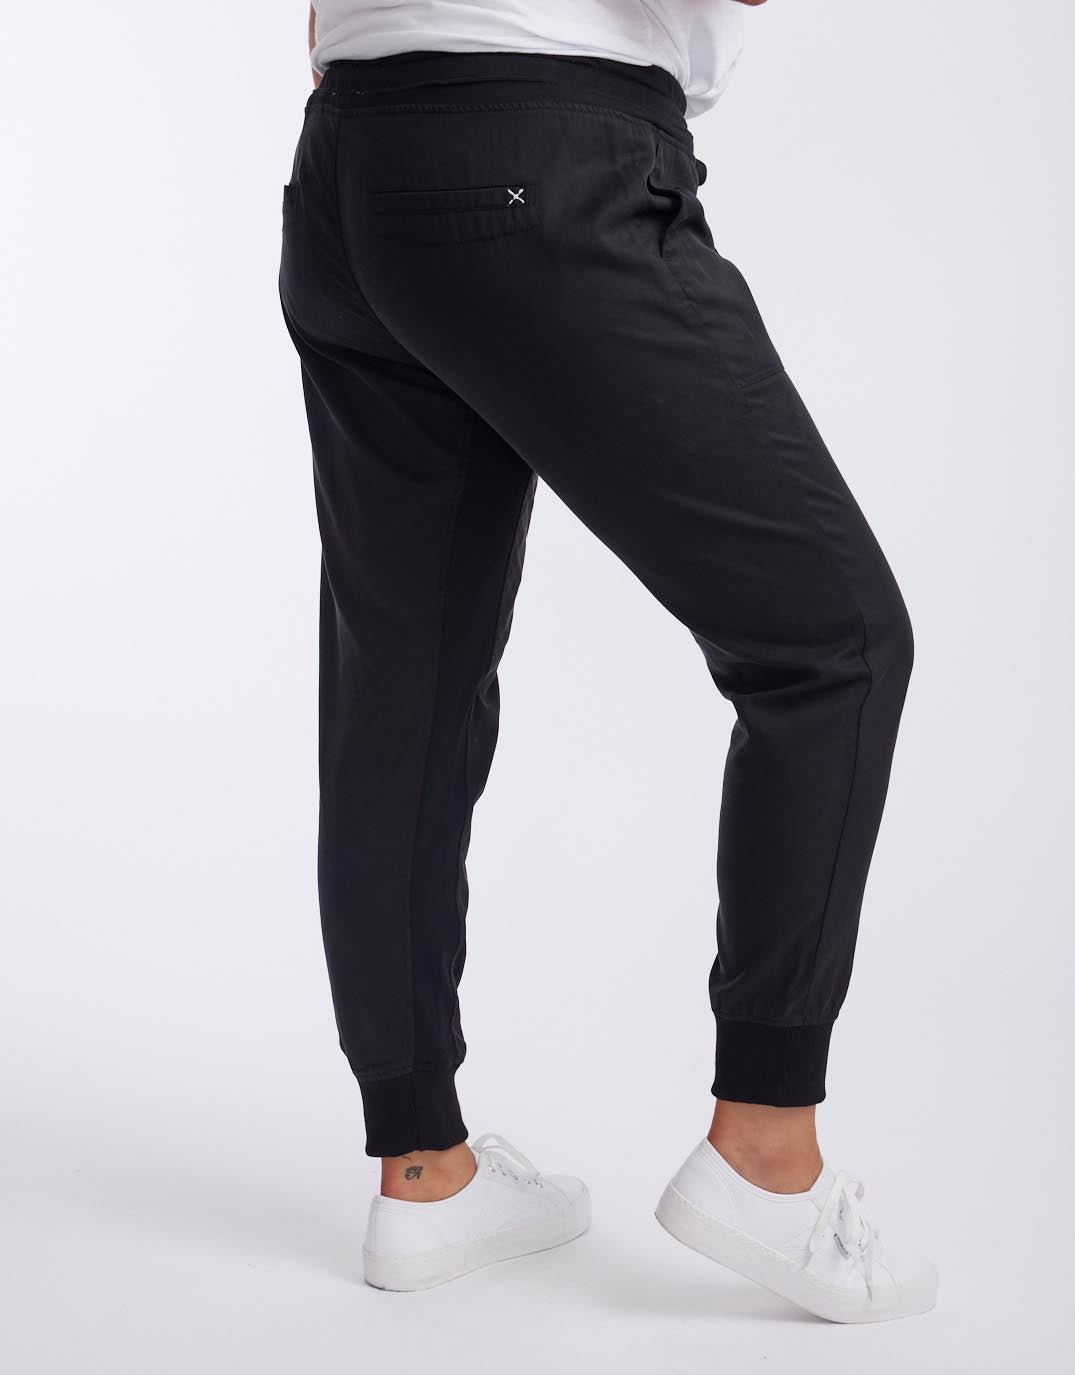 white-co-the-weekend-utility-pant-black-womens-clothing